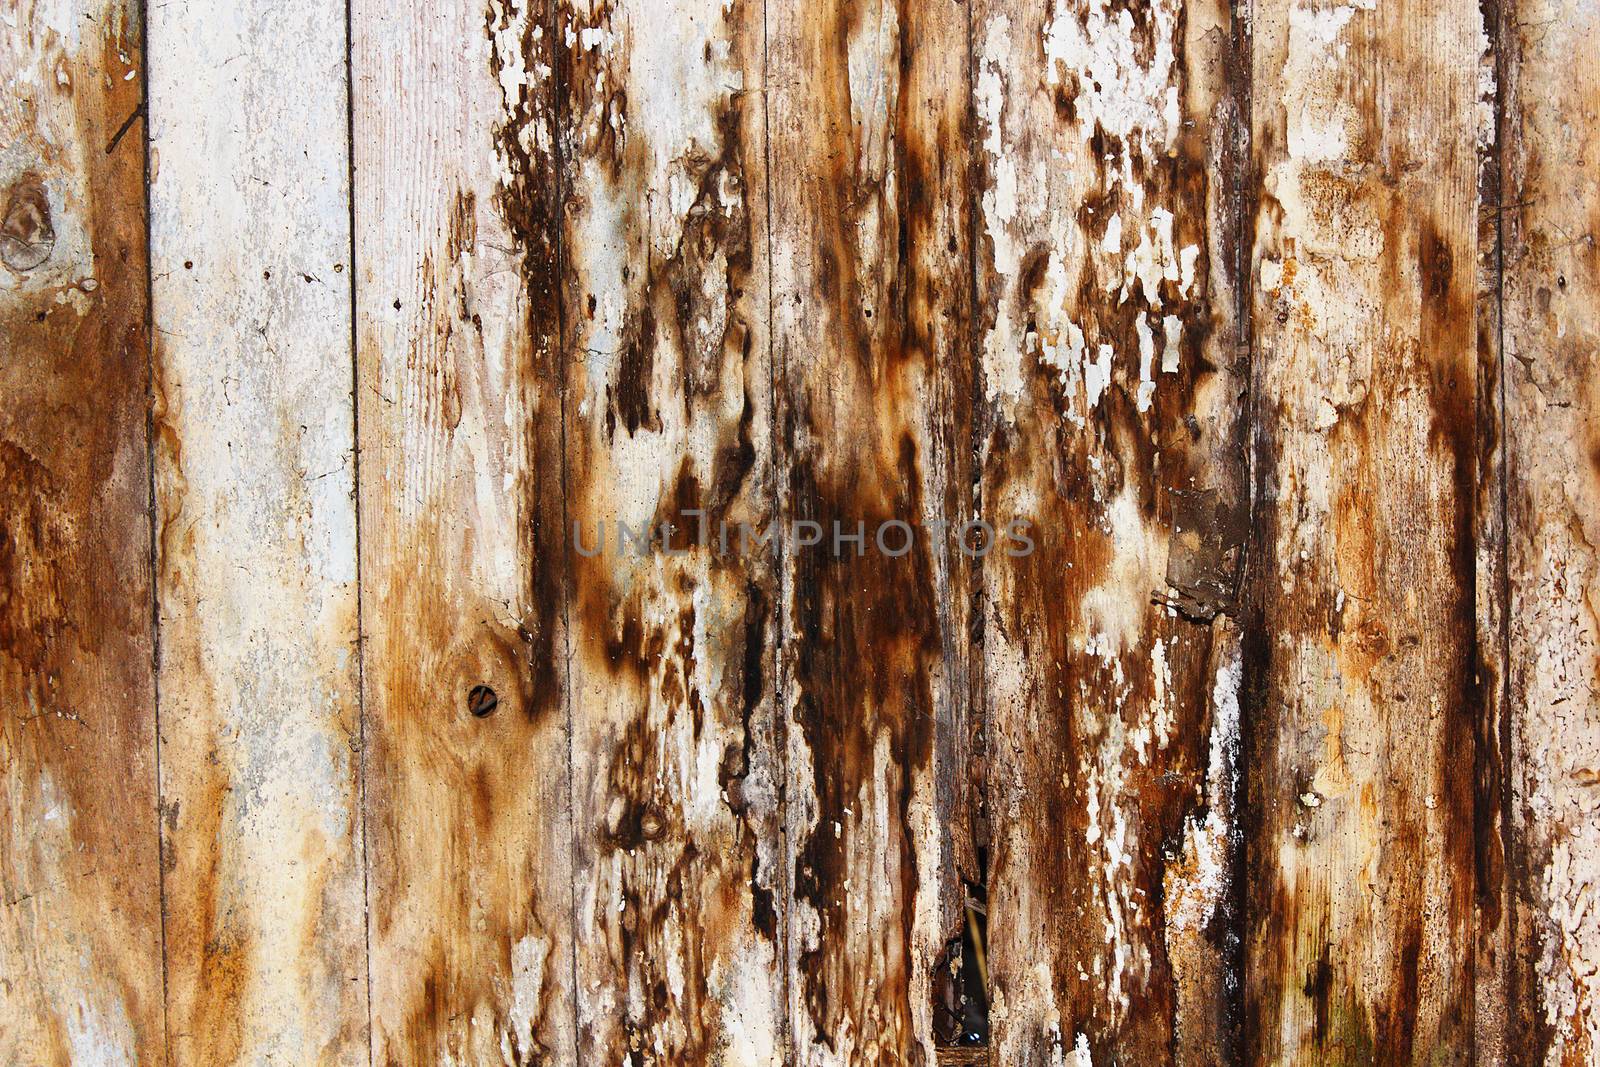 mold and fungus on damp spruce planks by taviphoto